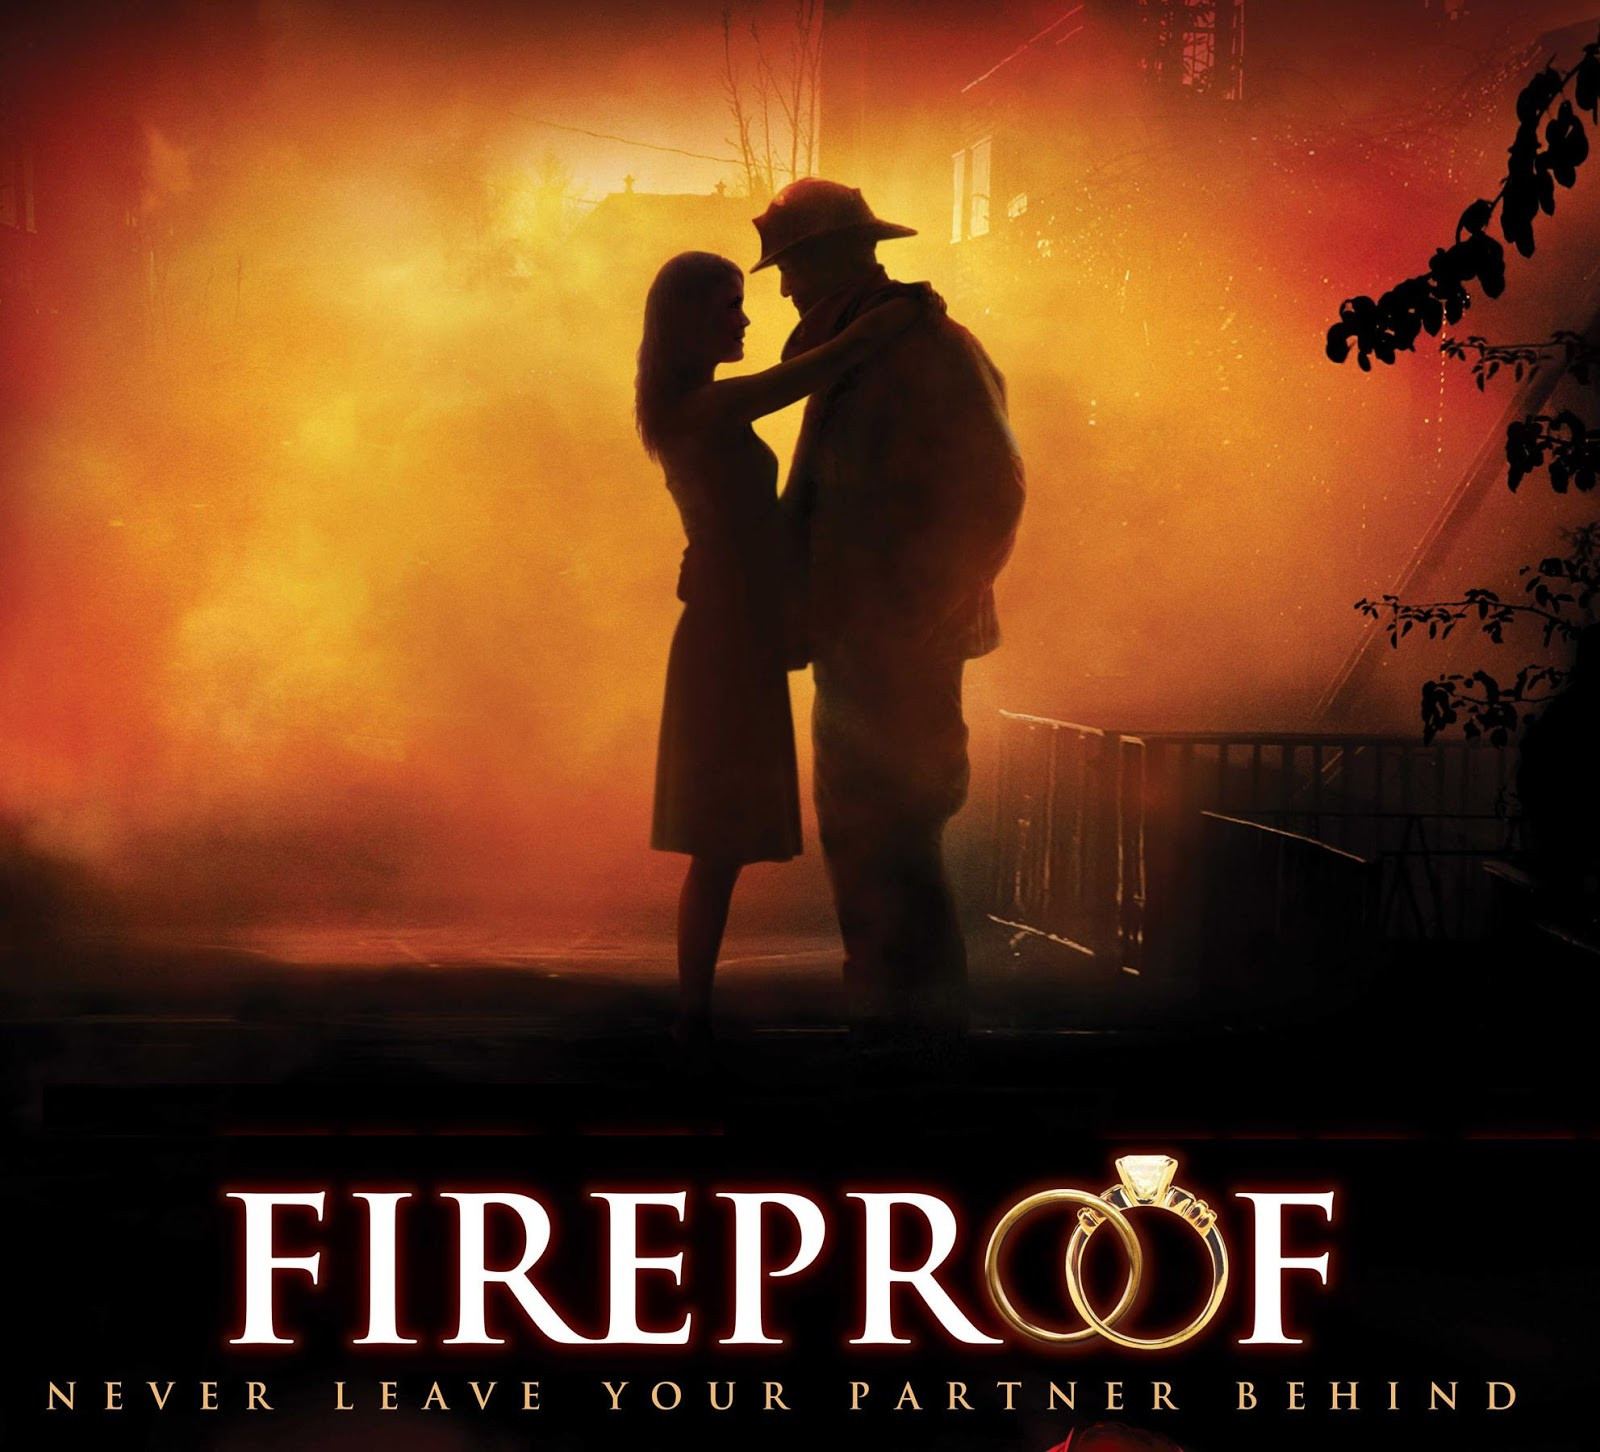 Movie Quotes About Marriage
 Marriage Quotes Fireproof Movie QuotesGram